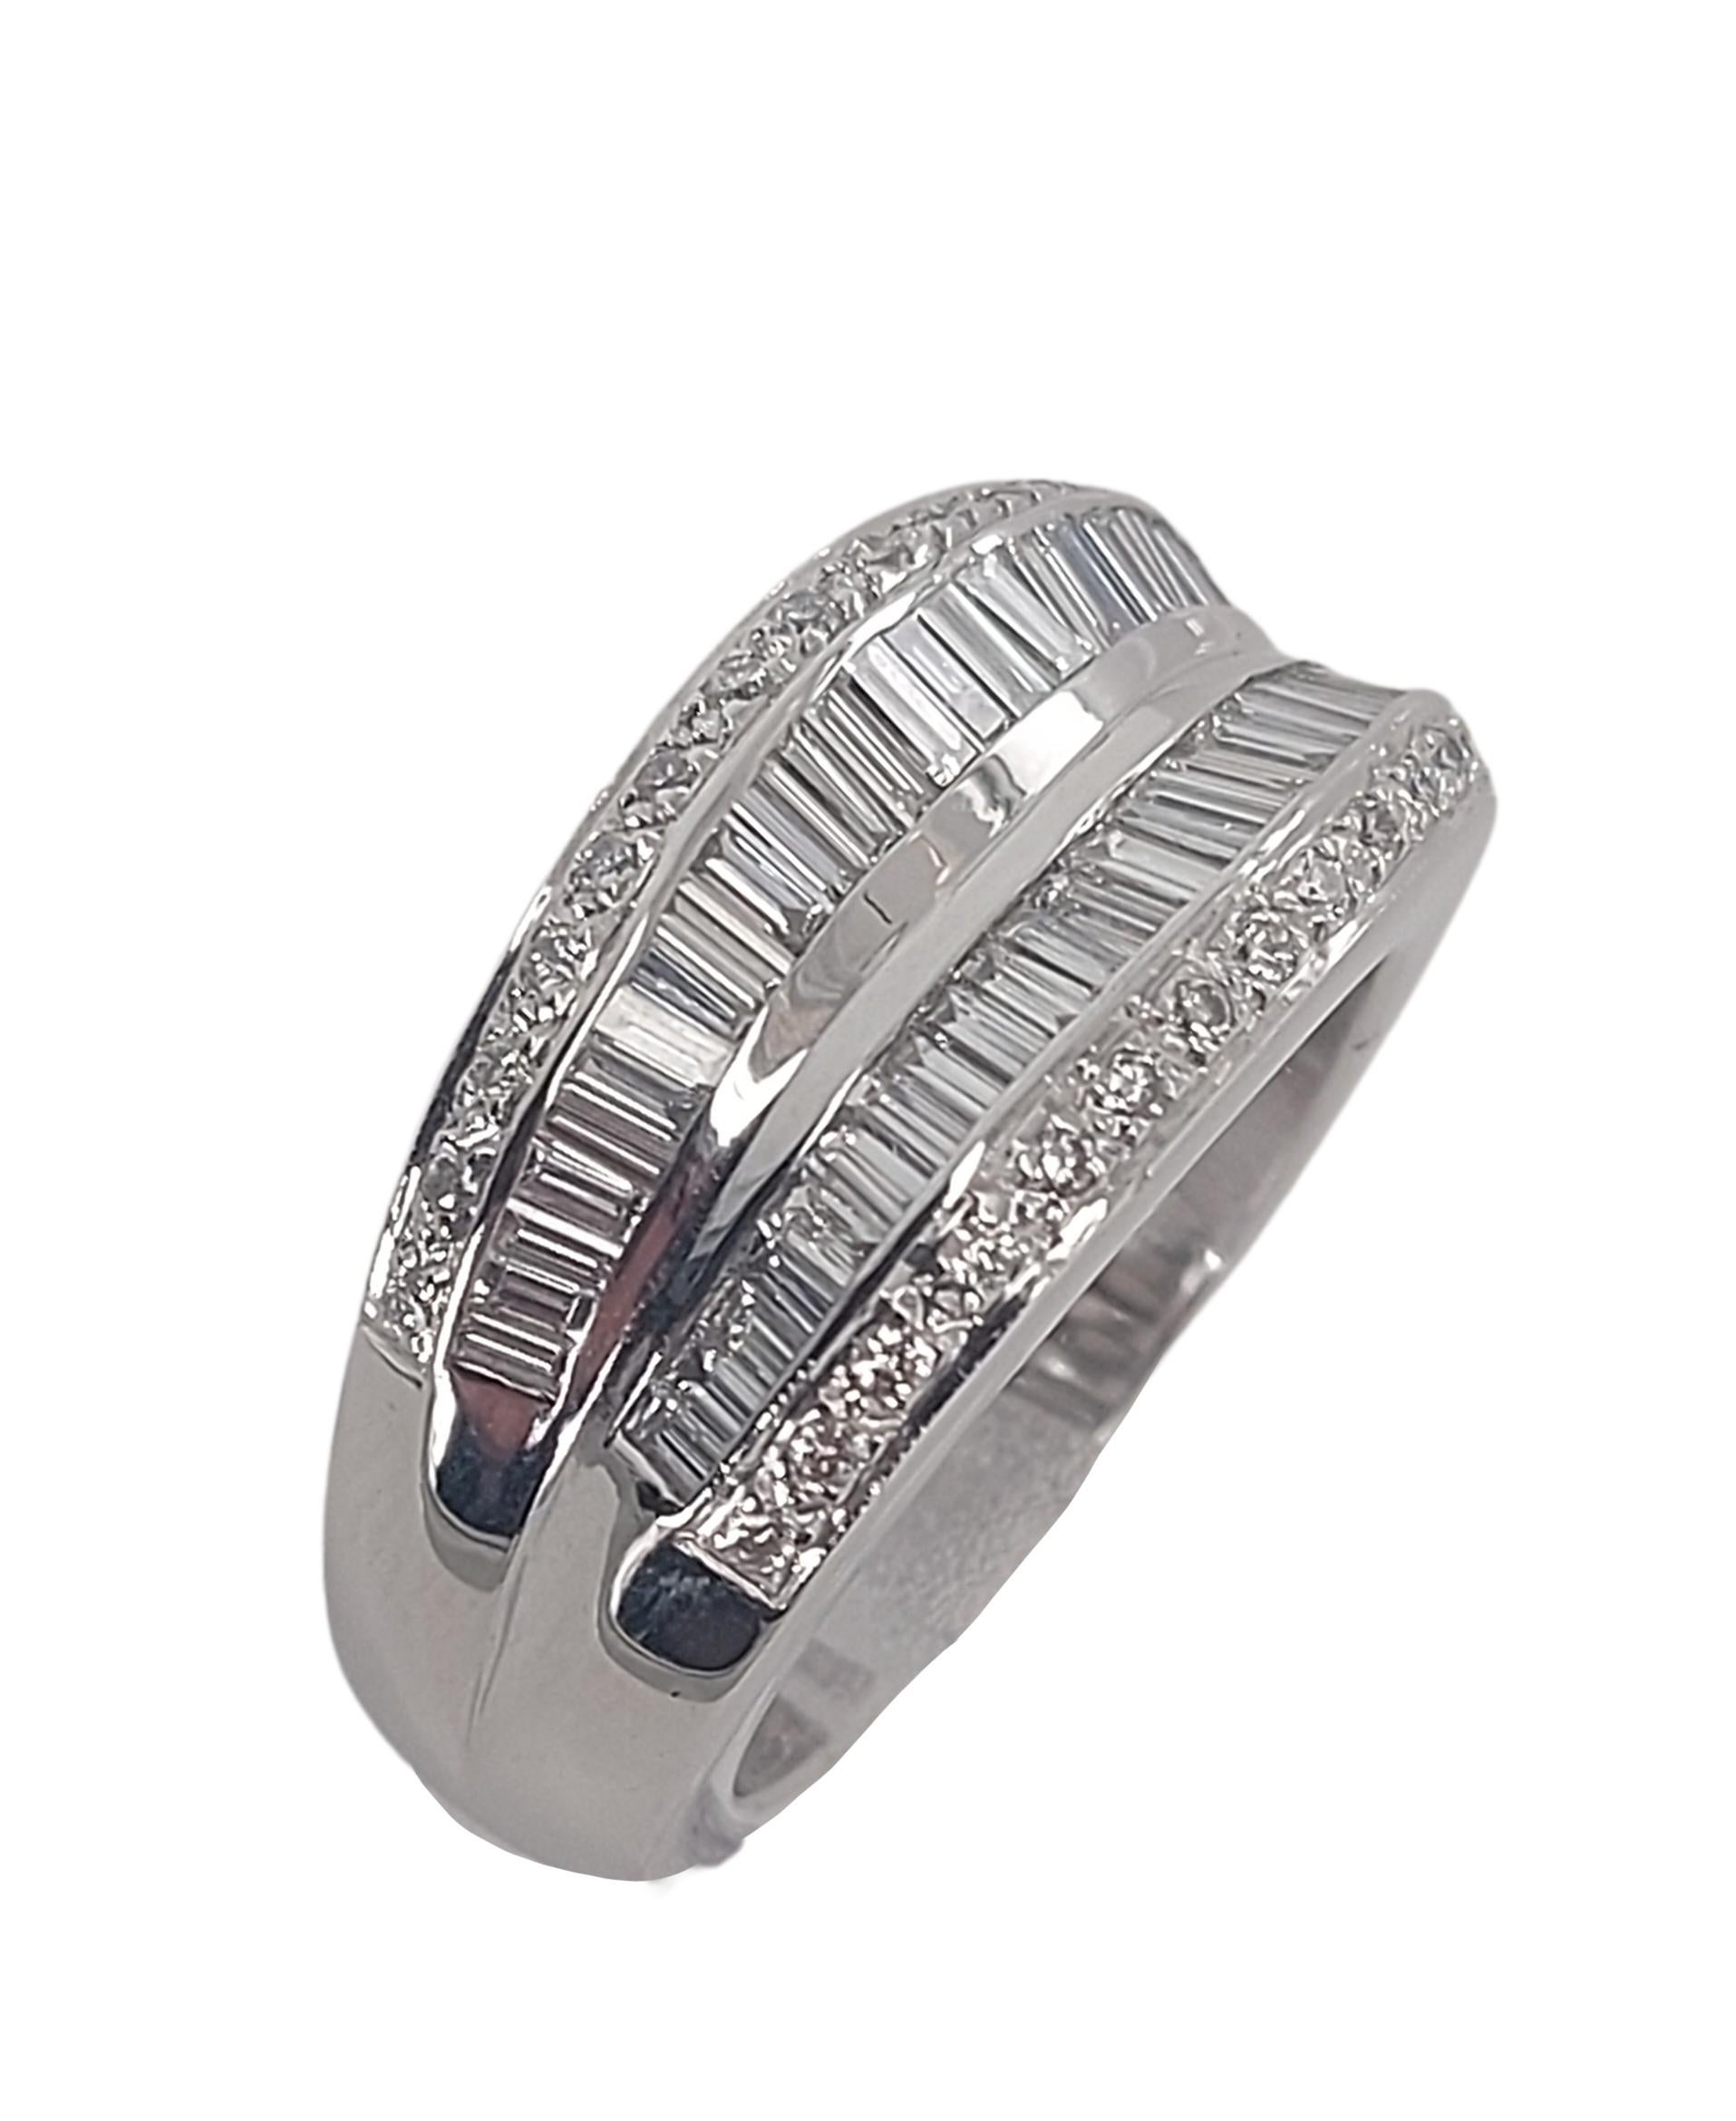 Gorgeous 18kt White Gold Ring With Baguette and Brilliant Cut Diamonds 

Diamonds: Brilliant cut diamonds, together approx. 0.30ct and baguette cut diamonds together approx. 1,7 ct

Material: 18 kt white gold

Ring size: 54.4 EU / 7 US ( can be